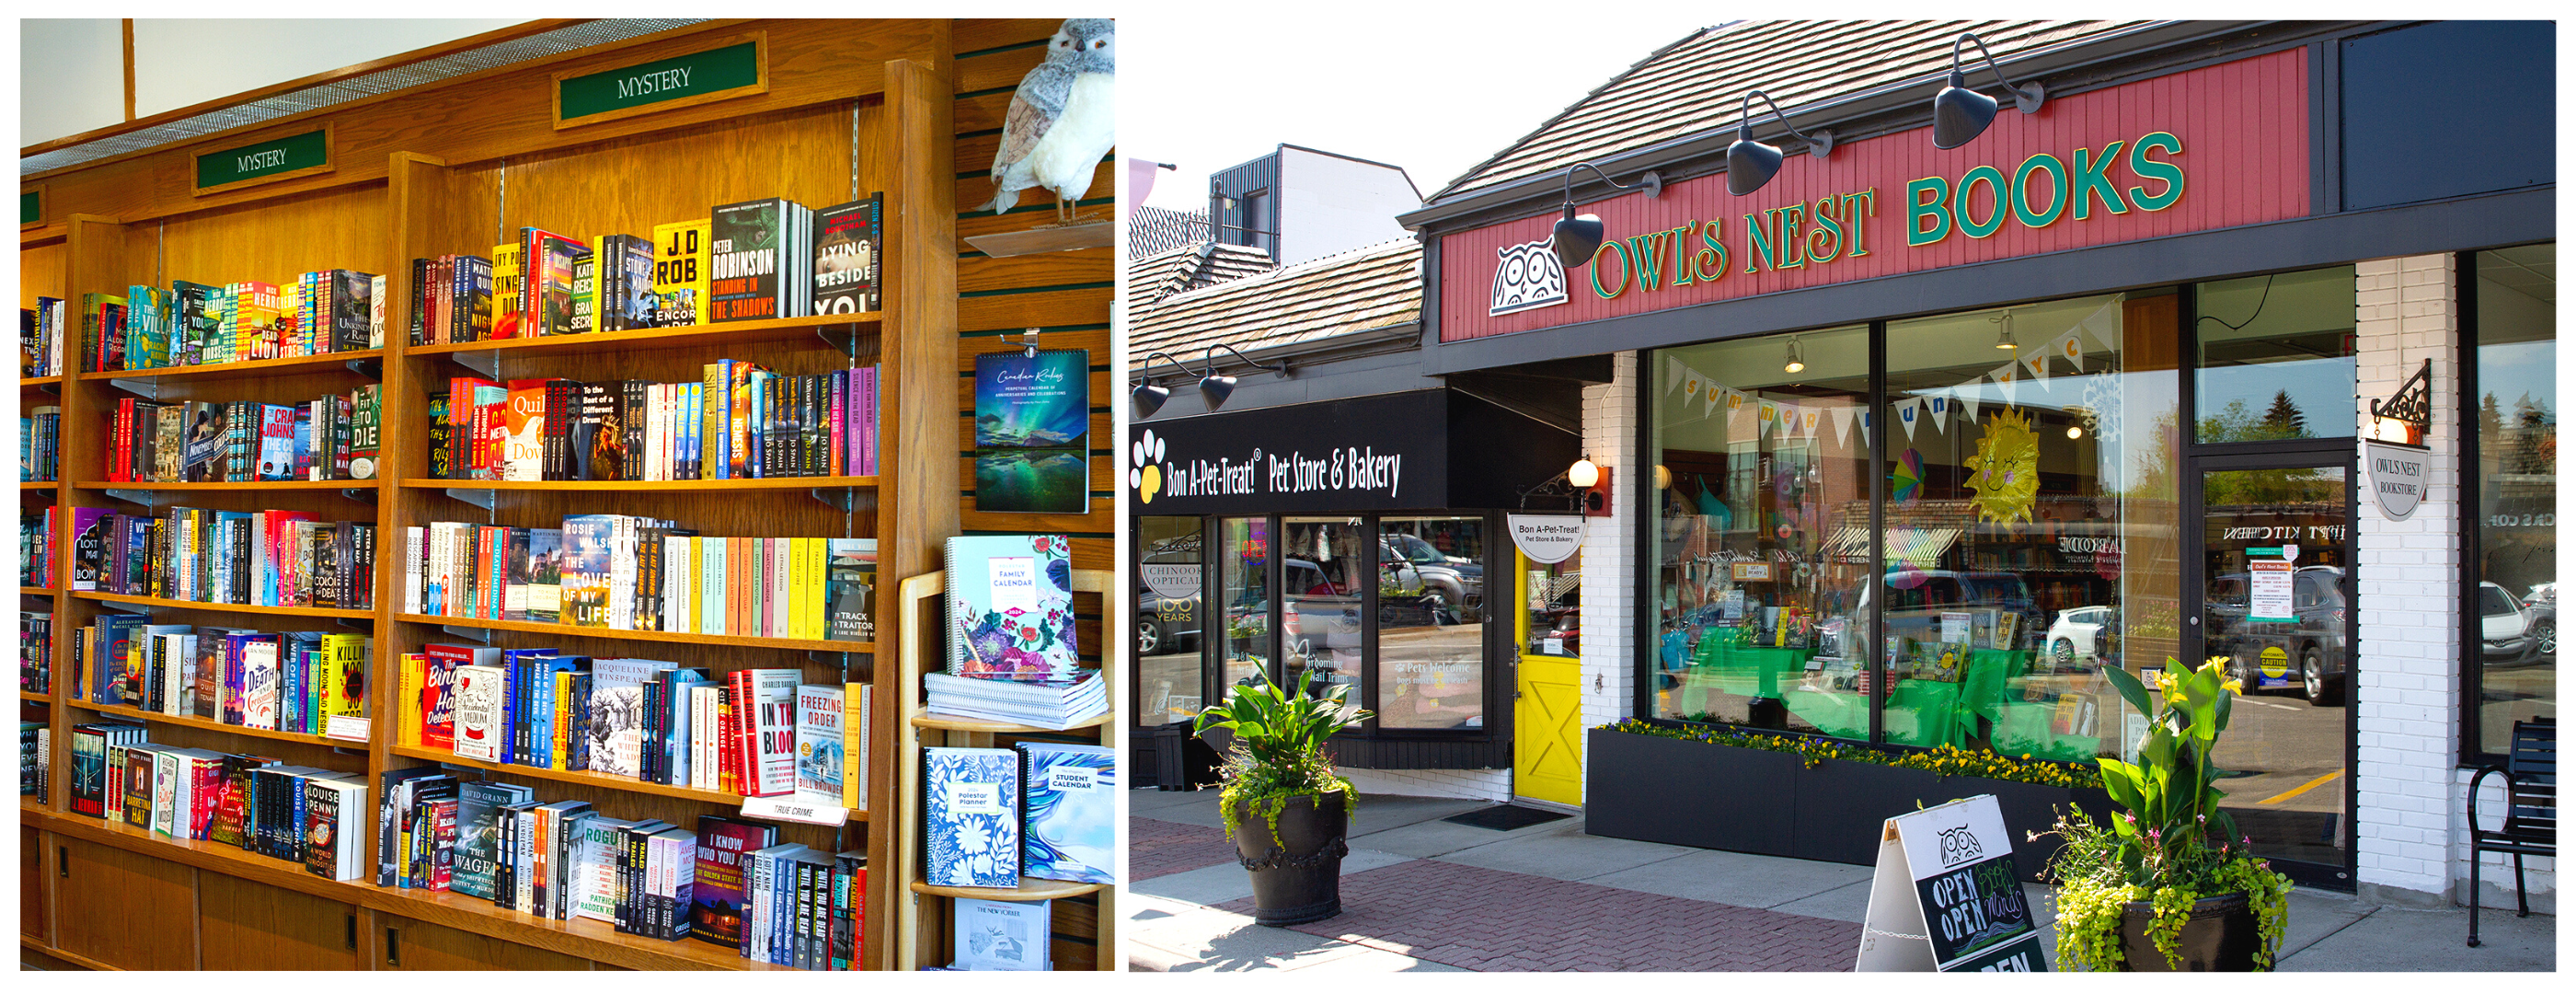 A photo of the mystery section at Owl's Nest Books and a photo of the exterior including the side and window display.